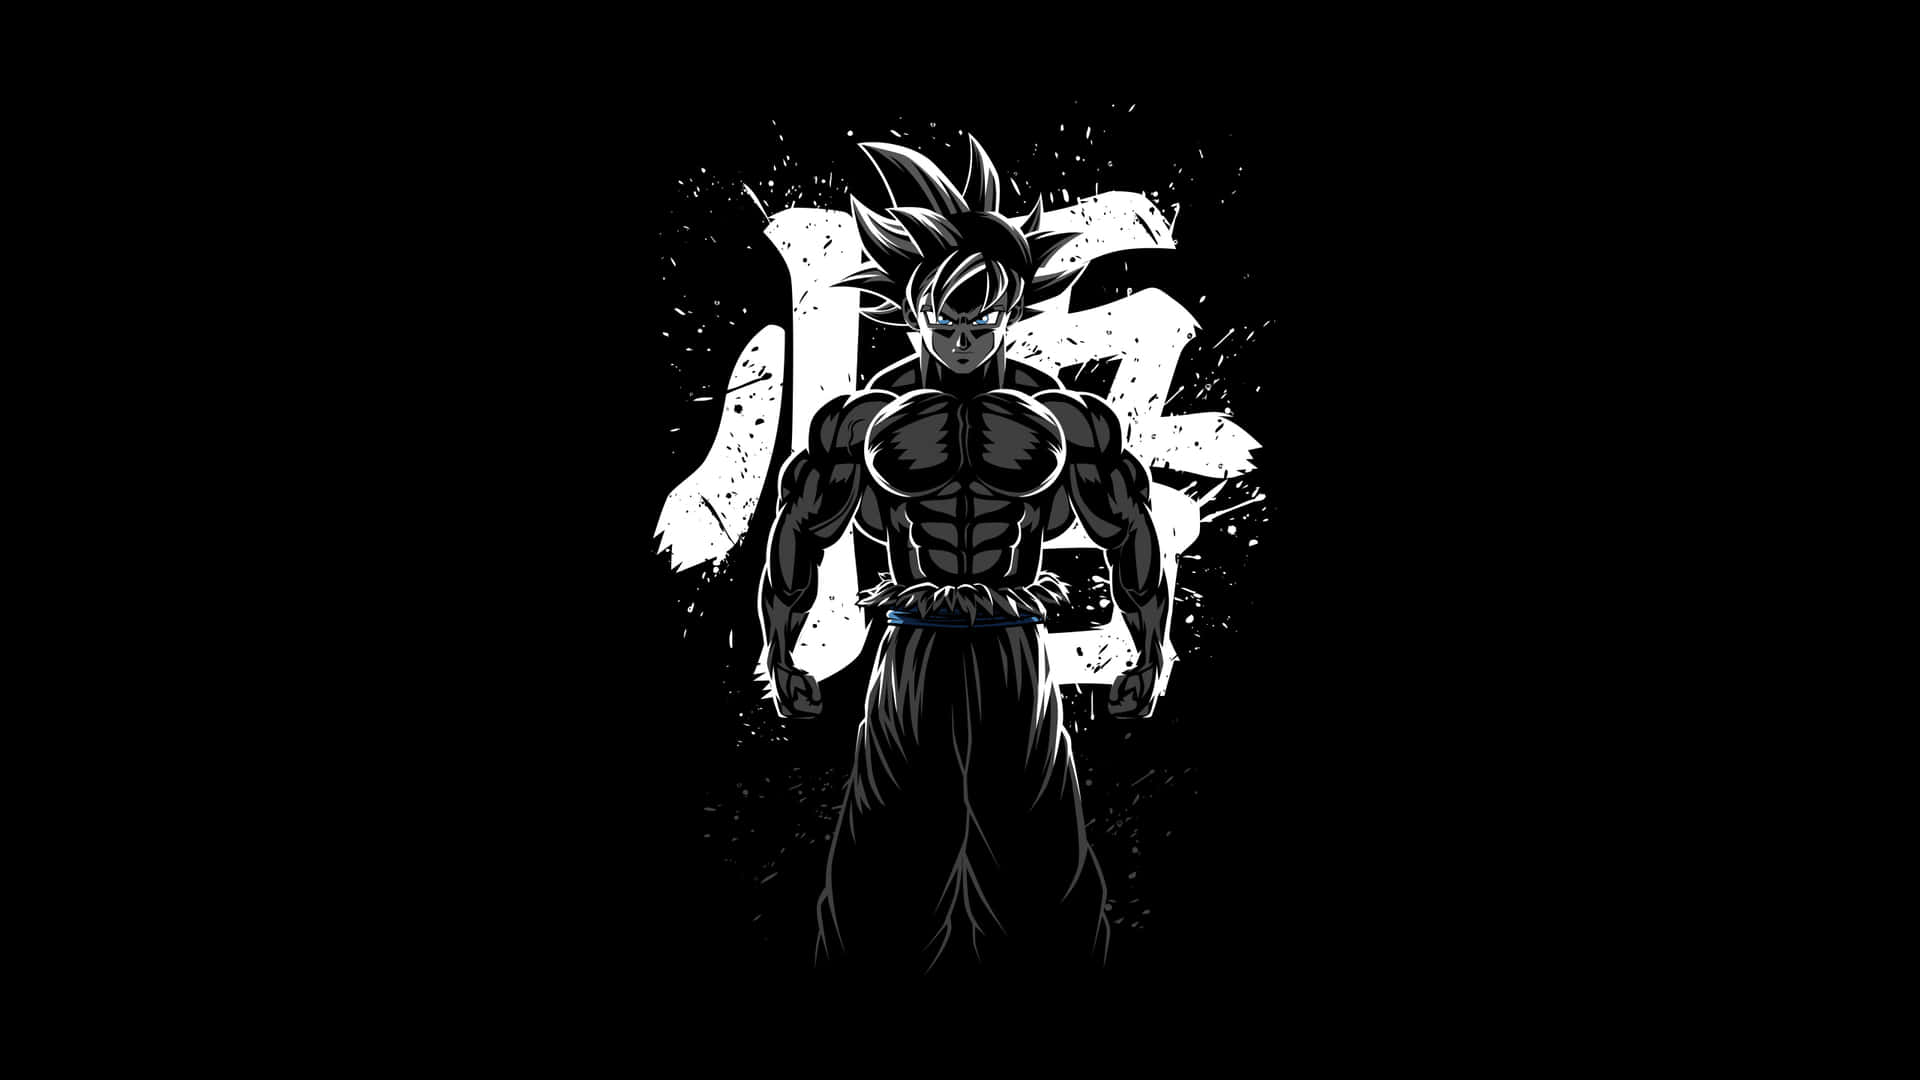 dbz drawings with background